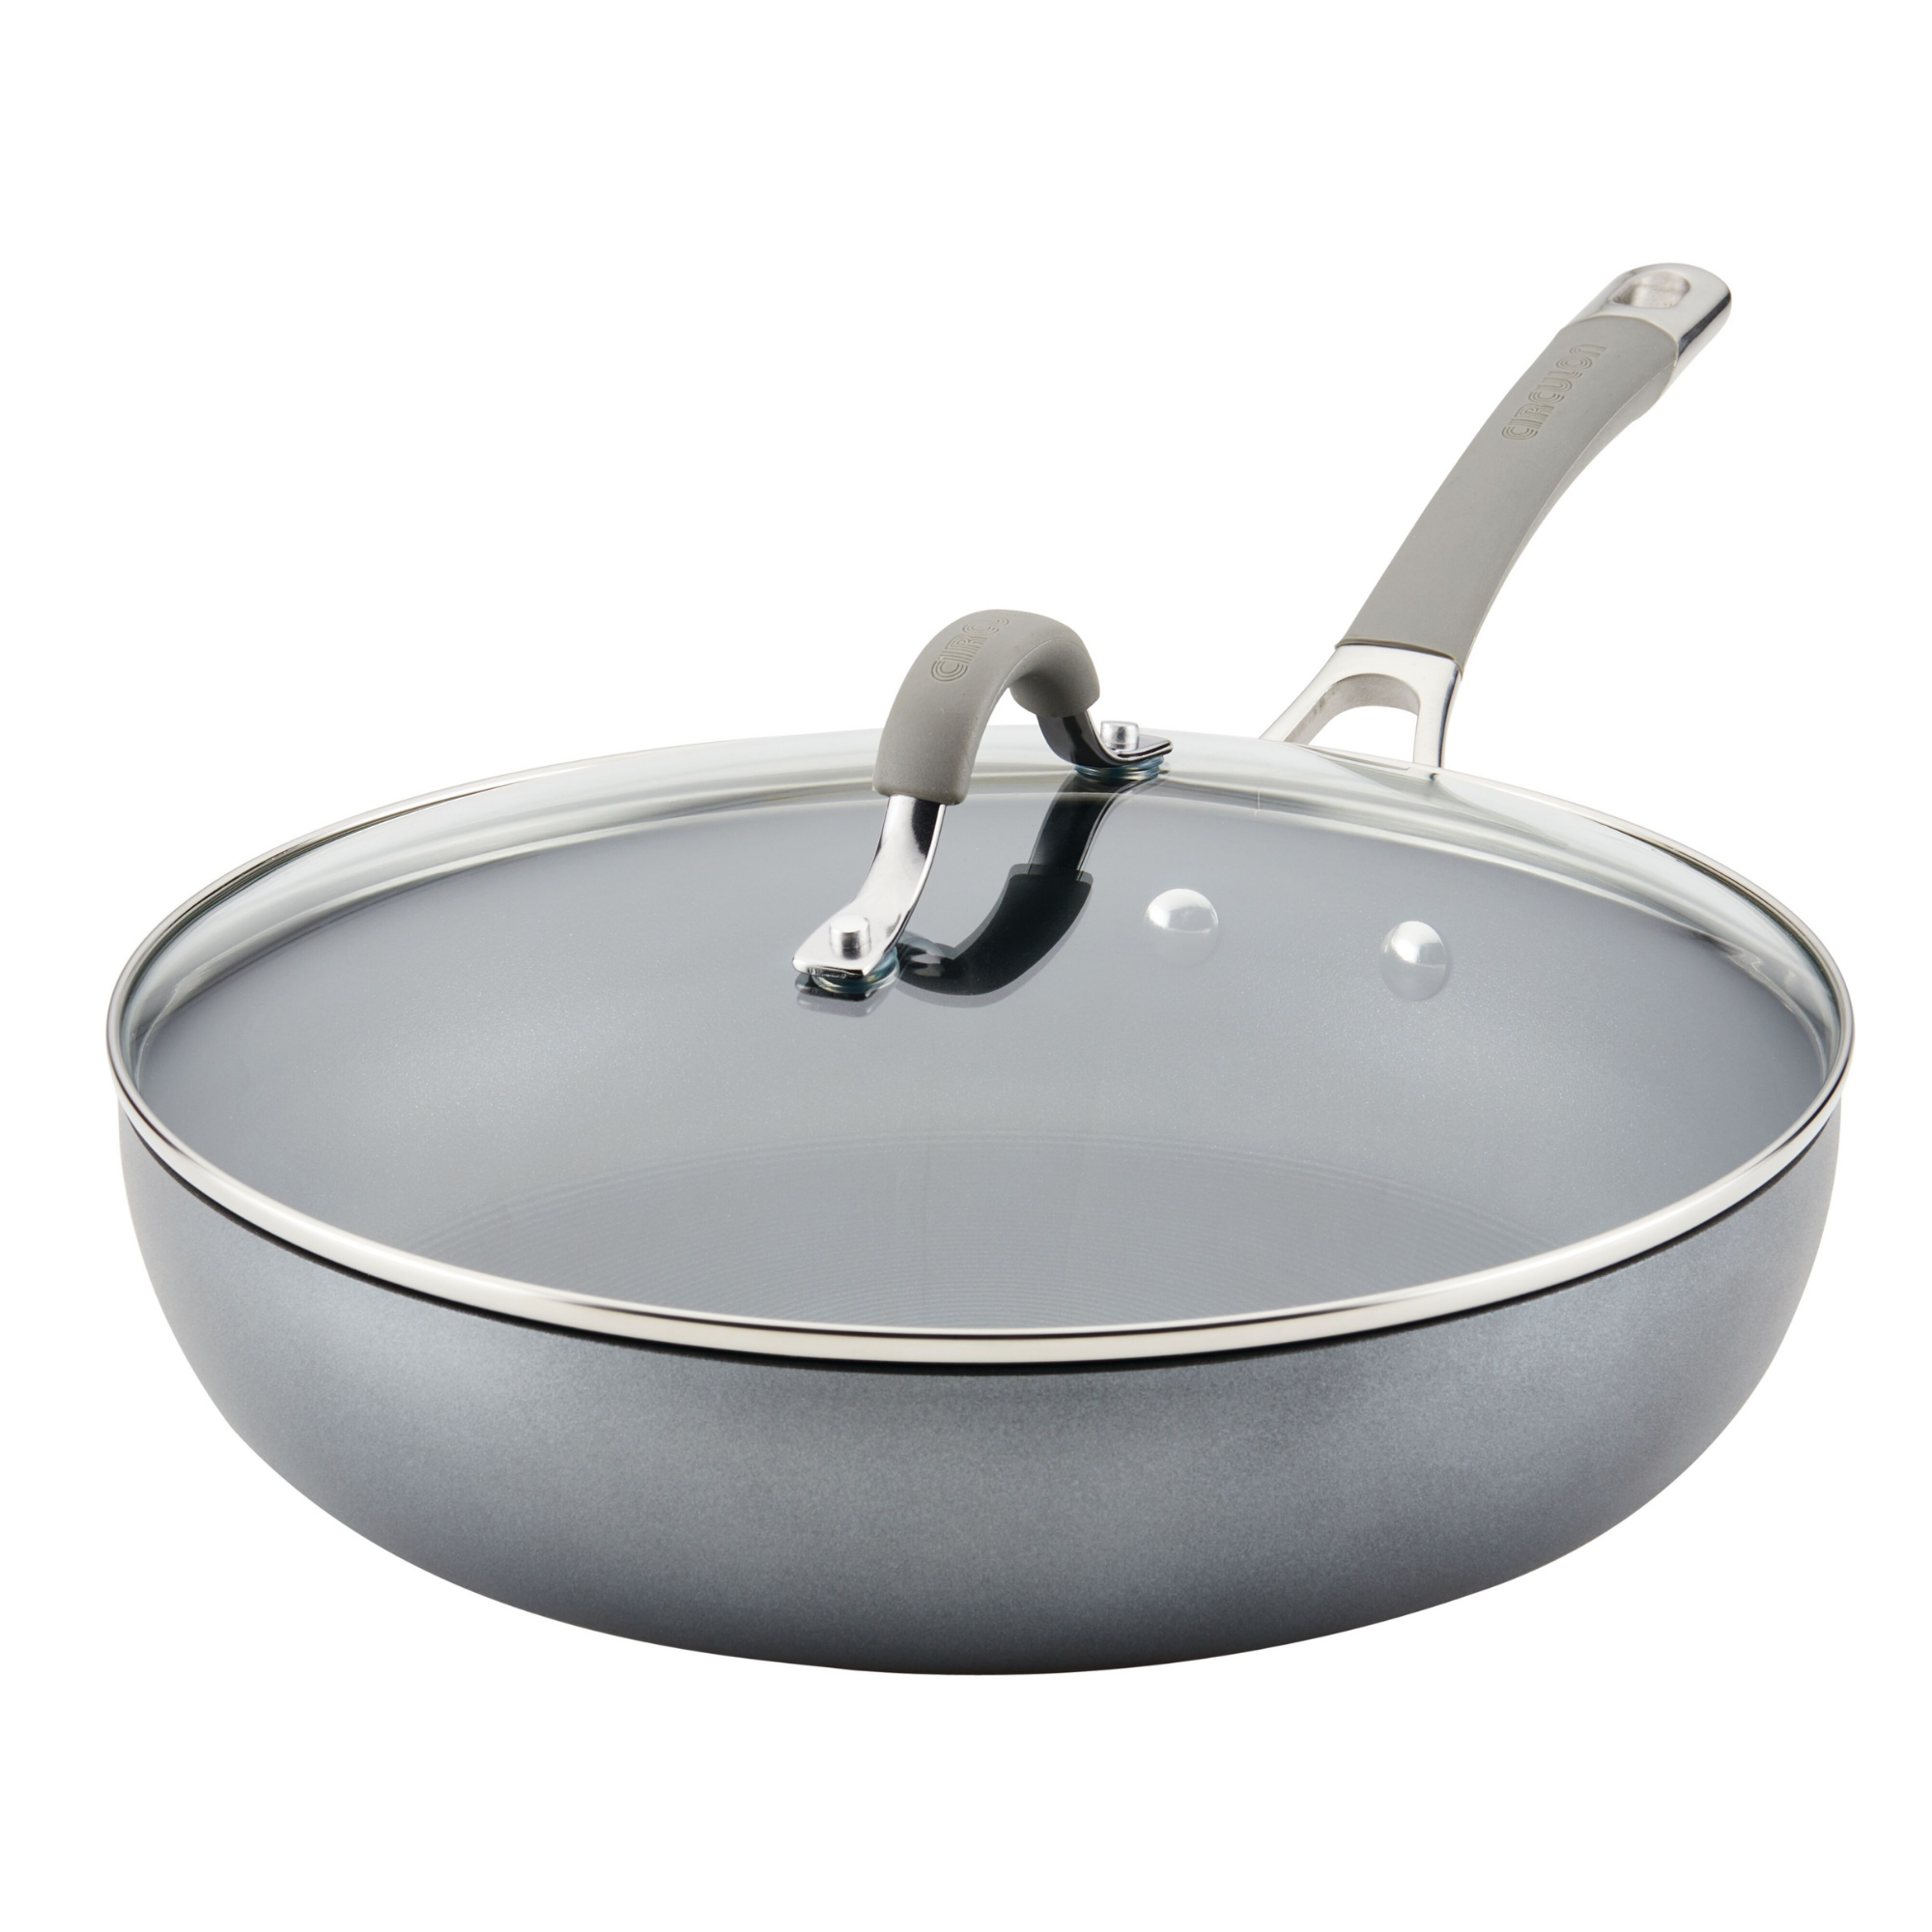 Nonstick 14 inch Nonstick Frying Pan, Family Sized Open Skillet Cake pan  for baking in square